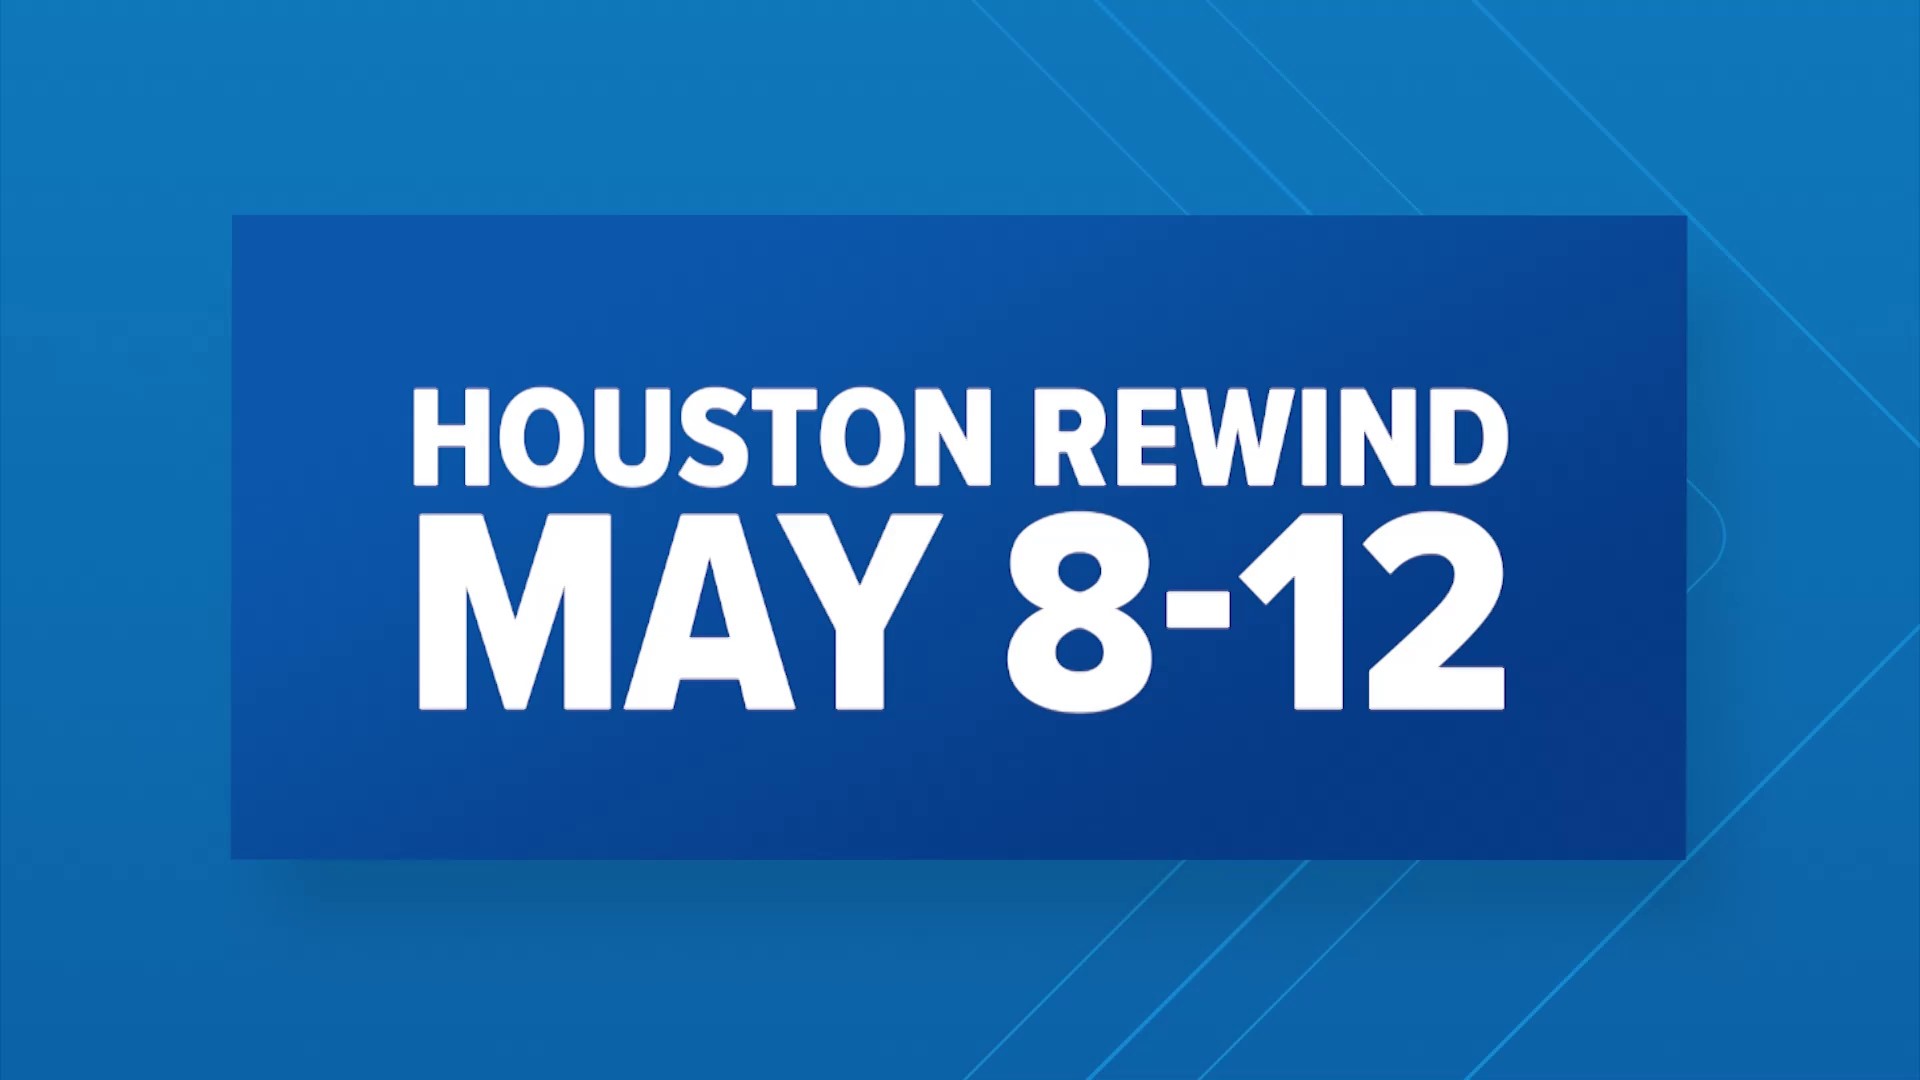 In every episode of the Houston Rewind, we get you caught up on stories you may have missed this week so you're ready for next week.